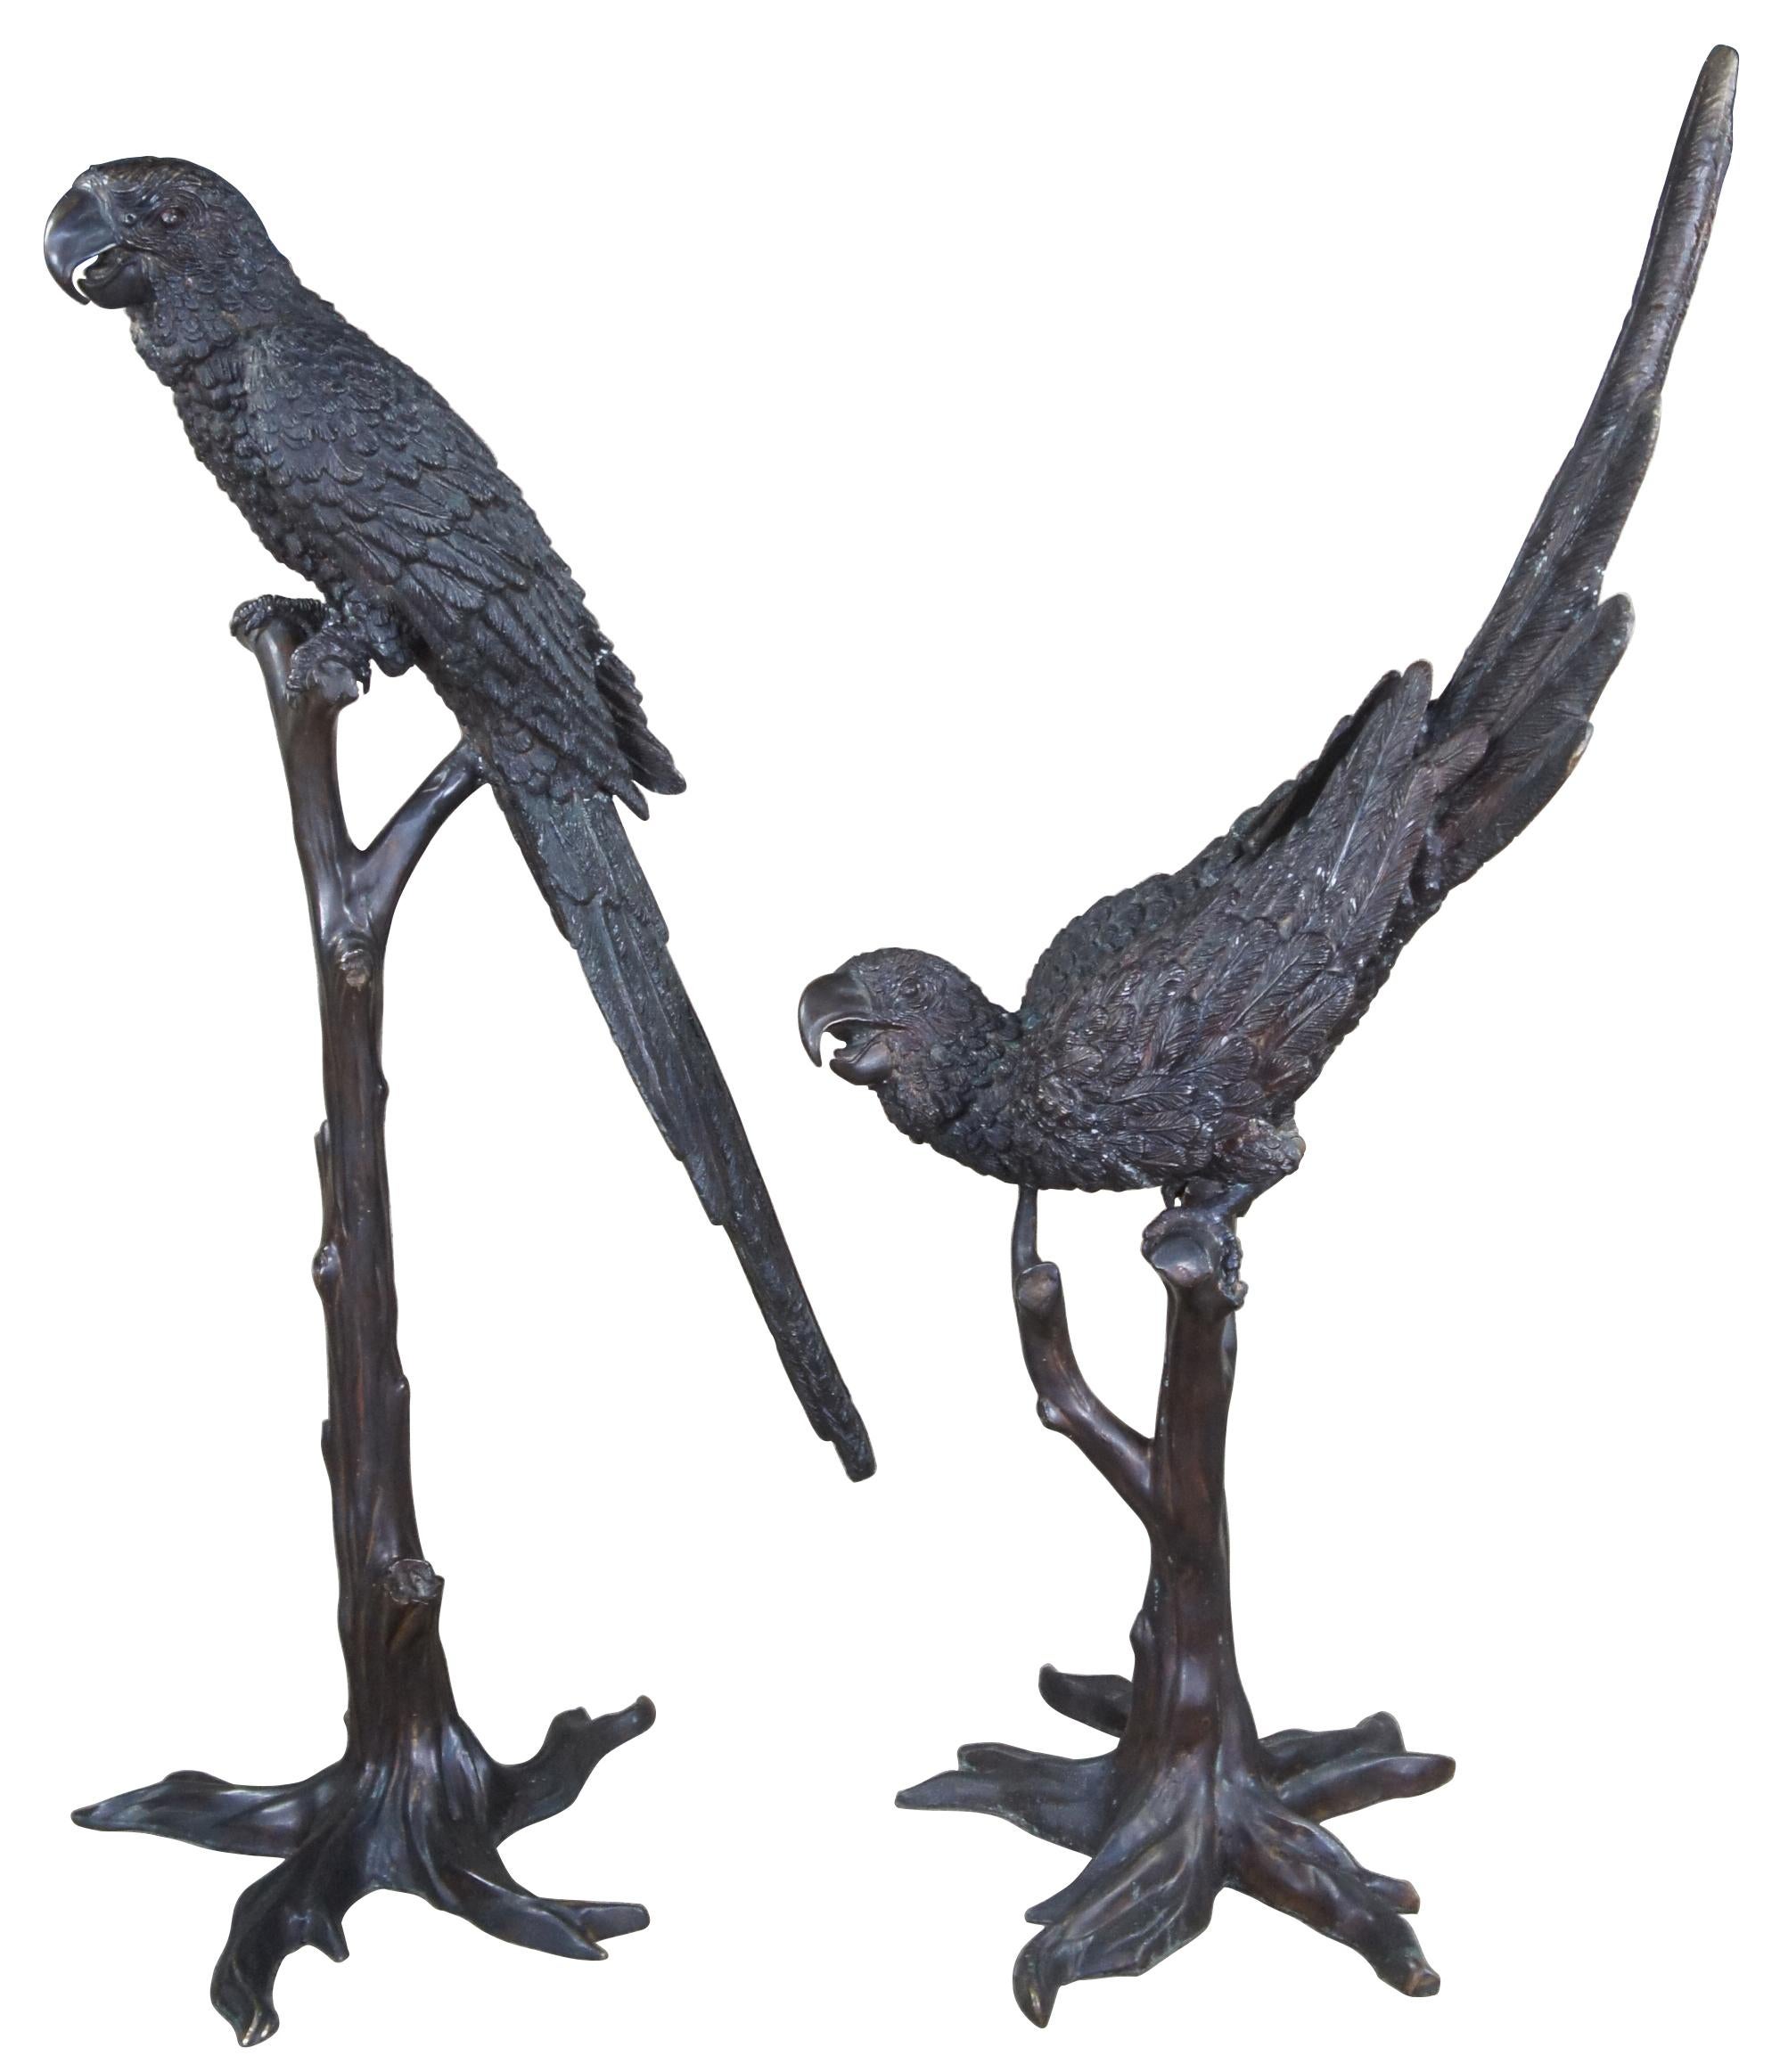 Exquisite Antique Pair of French Art Deco bronze oversized Macaw Parrots or birds perched on stands with nice patina by Camille, circa 1920s. These monumental art sculptures feature a realistic tree trunk that supports each parrot, and rendered in